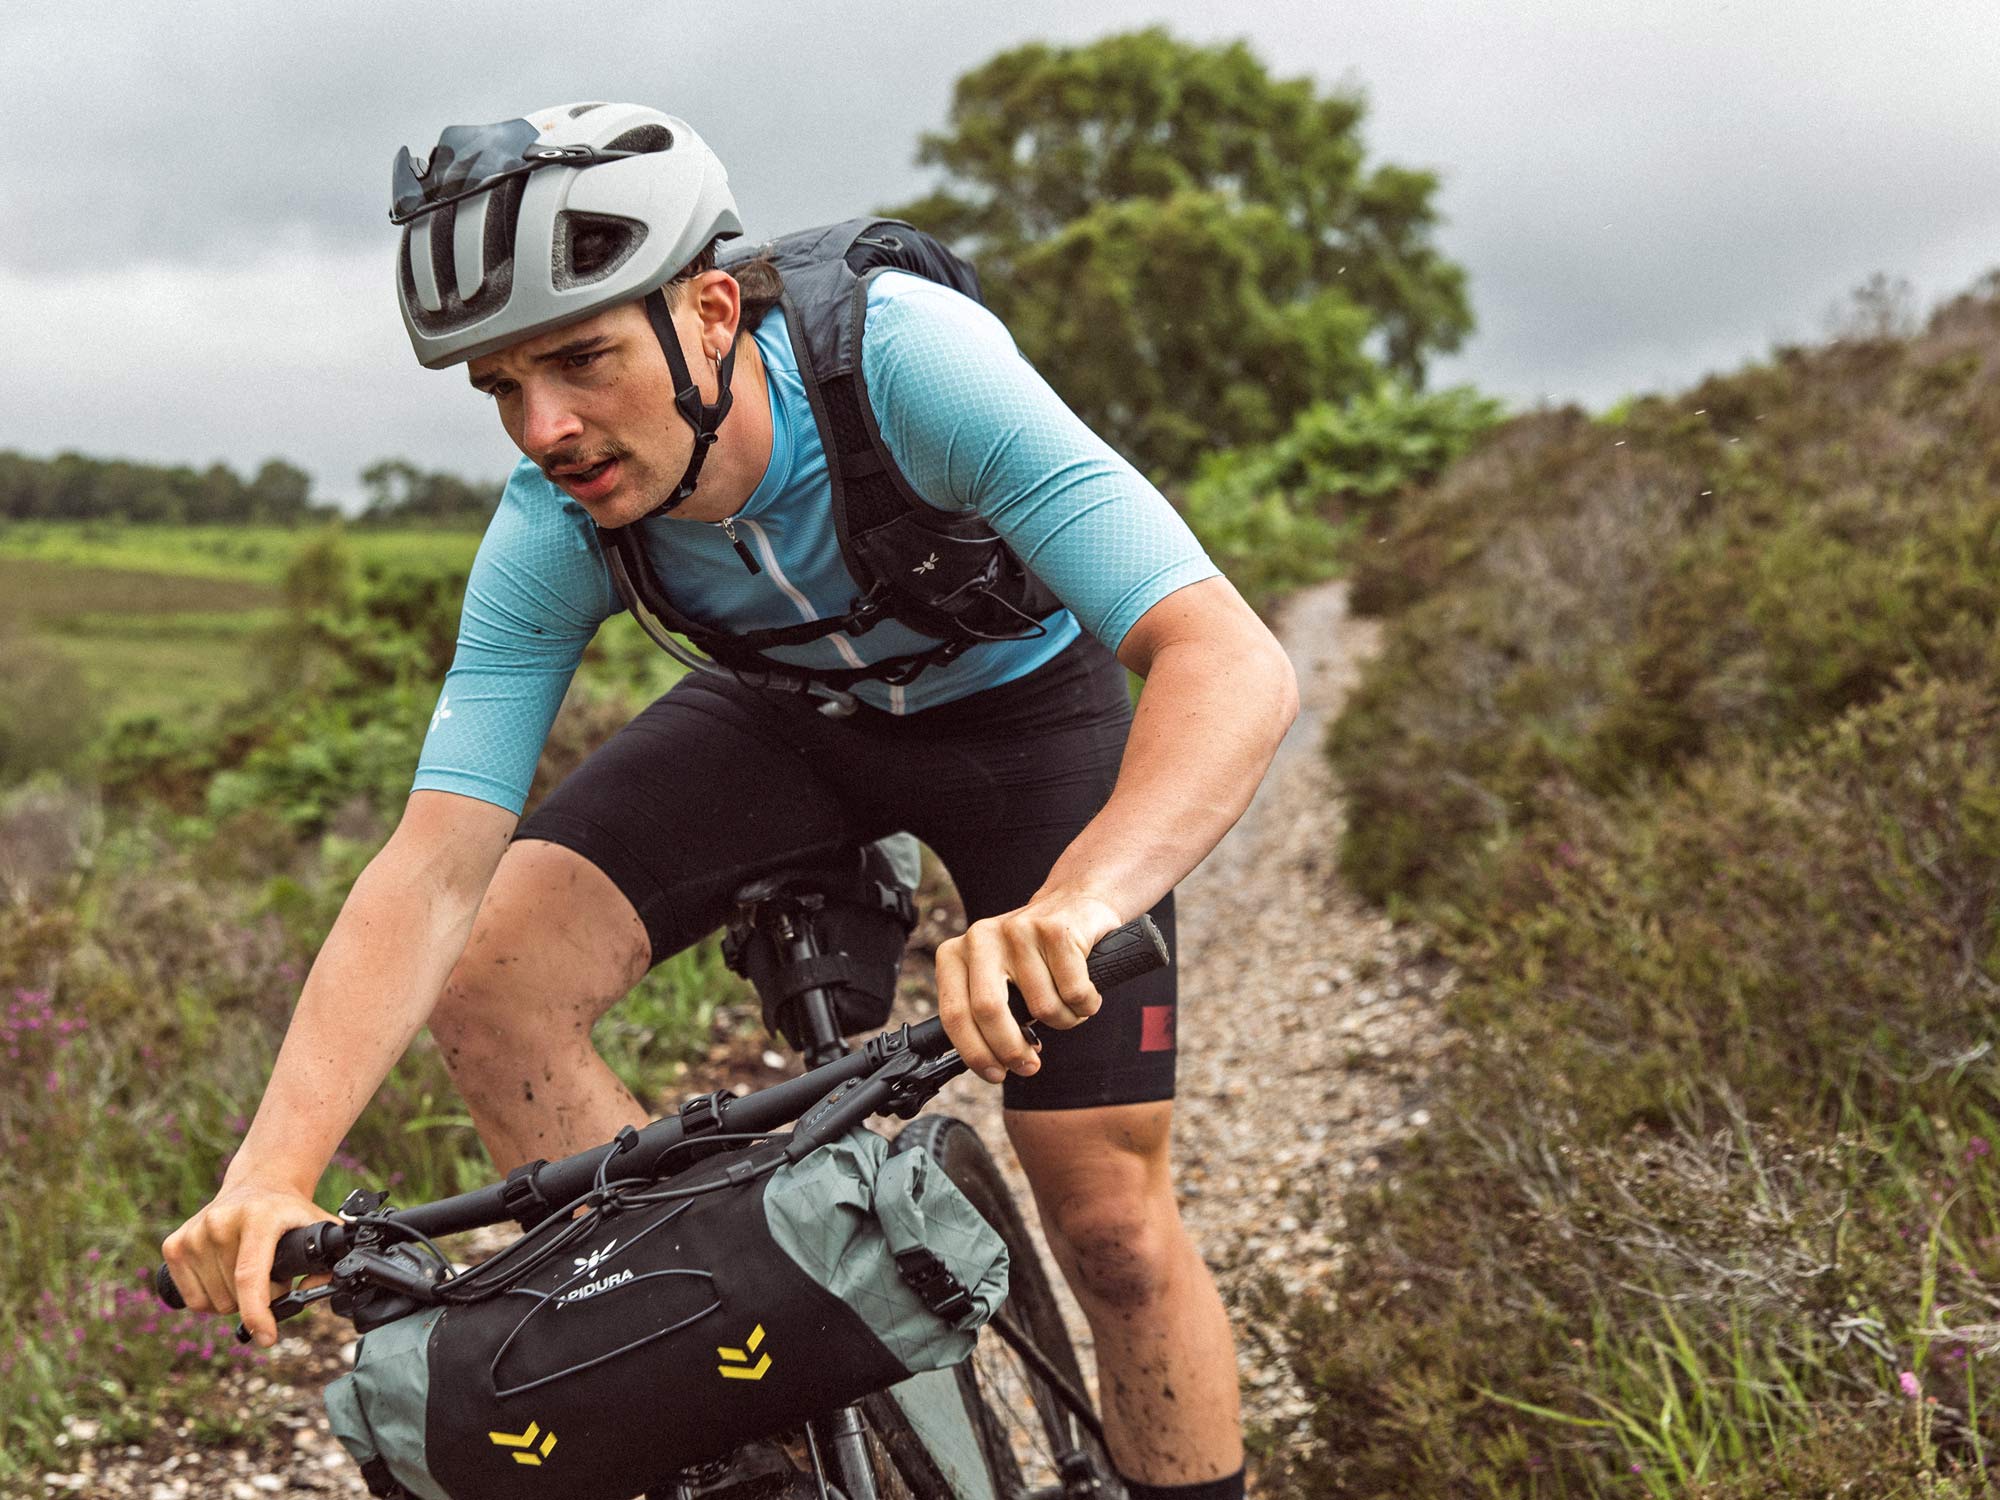 Apidura takes adventure Racing further in new Hydration Vest